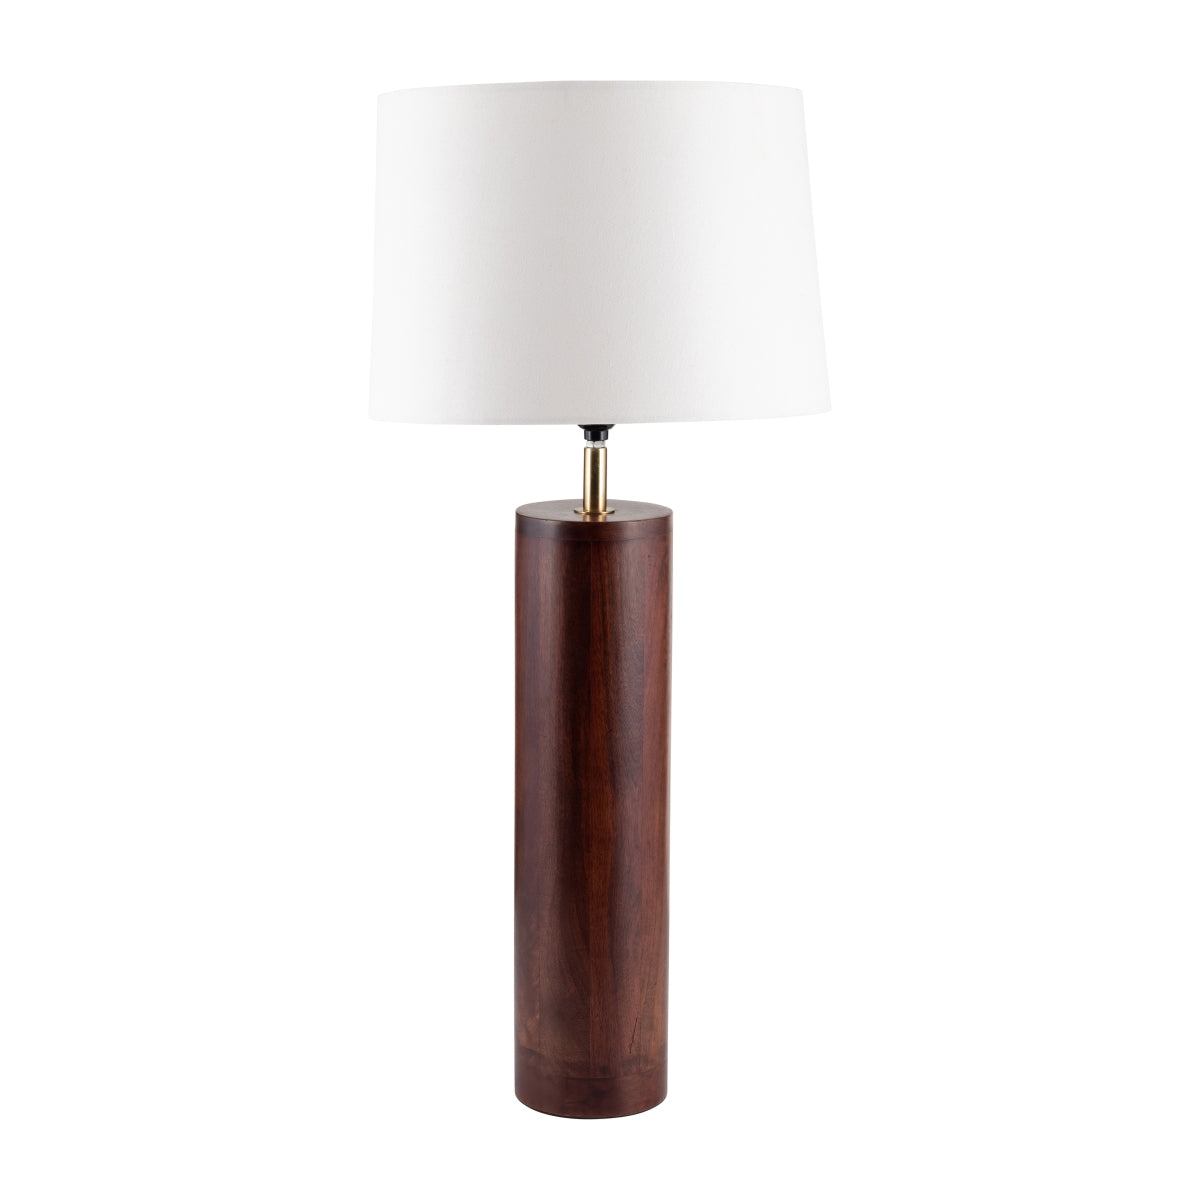 WOOD CLASSIC TABLE LAMP BROWN